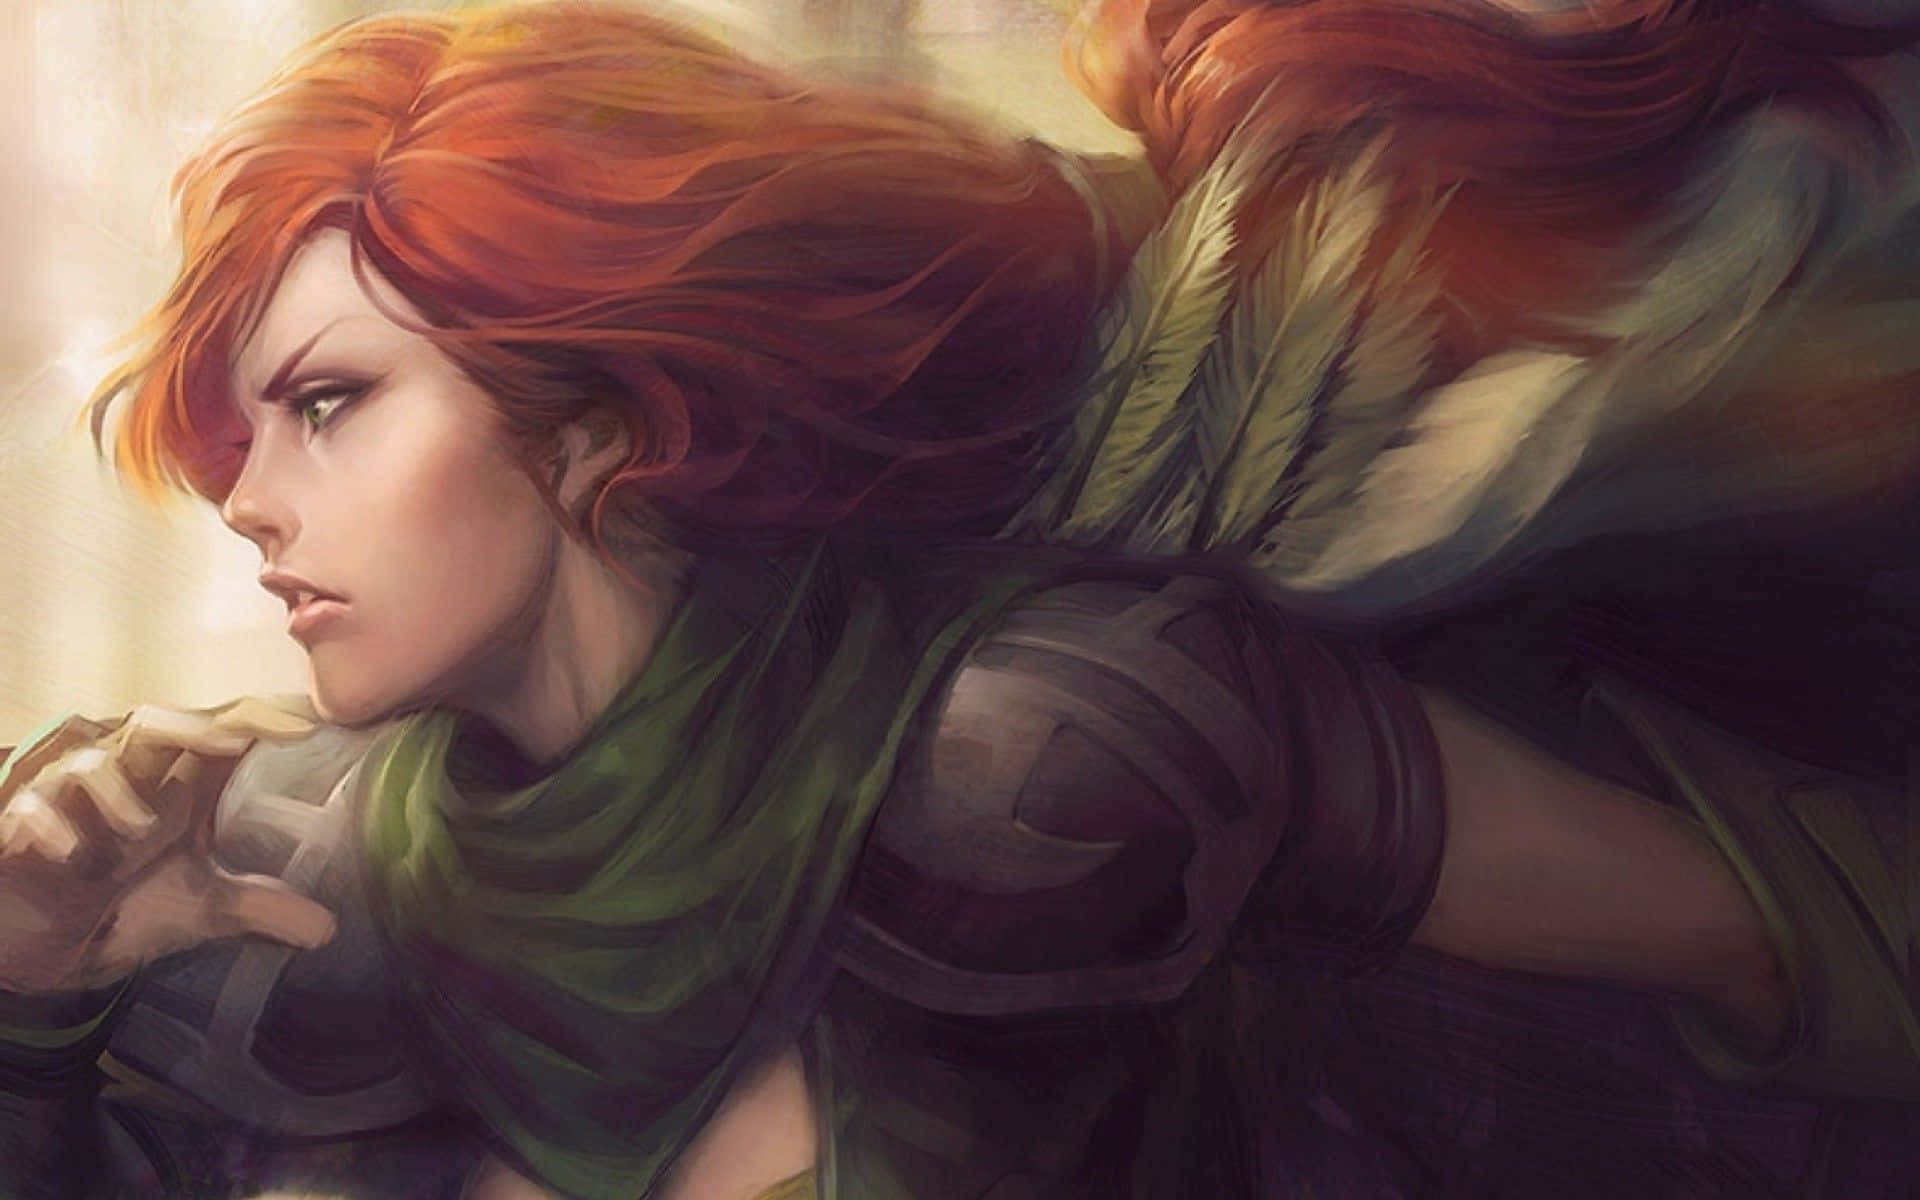 Windranger striking an epic pose in a mysterious forest Wallpaper